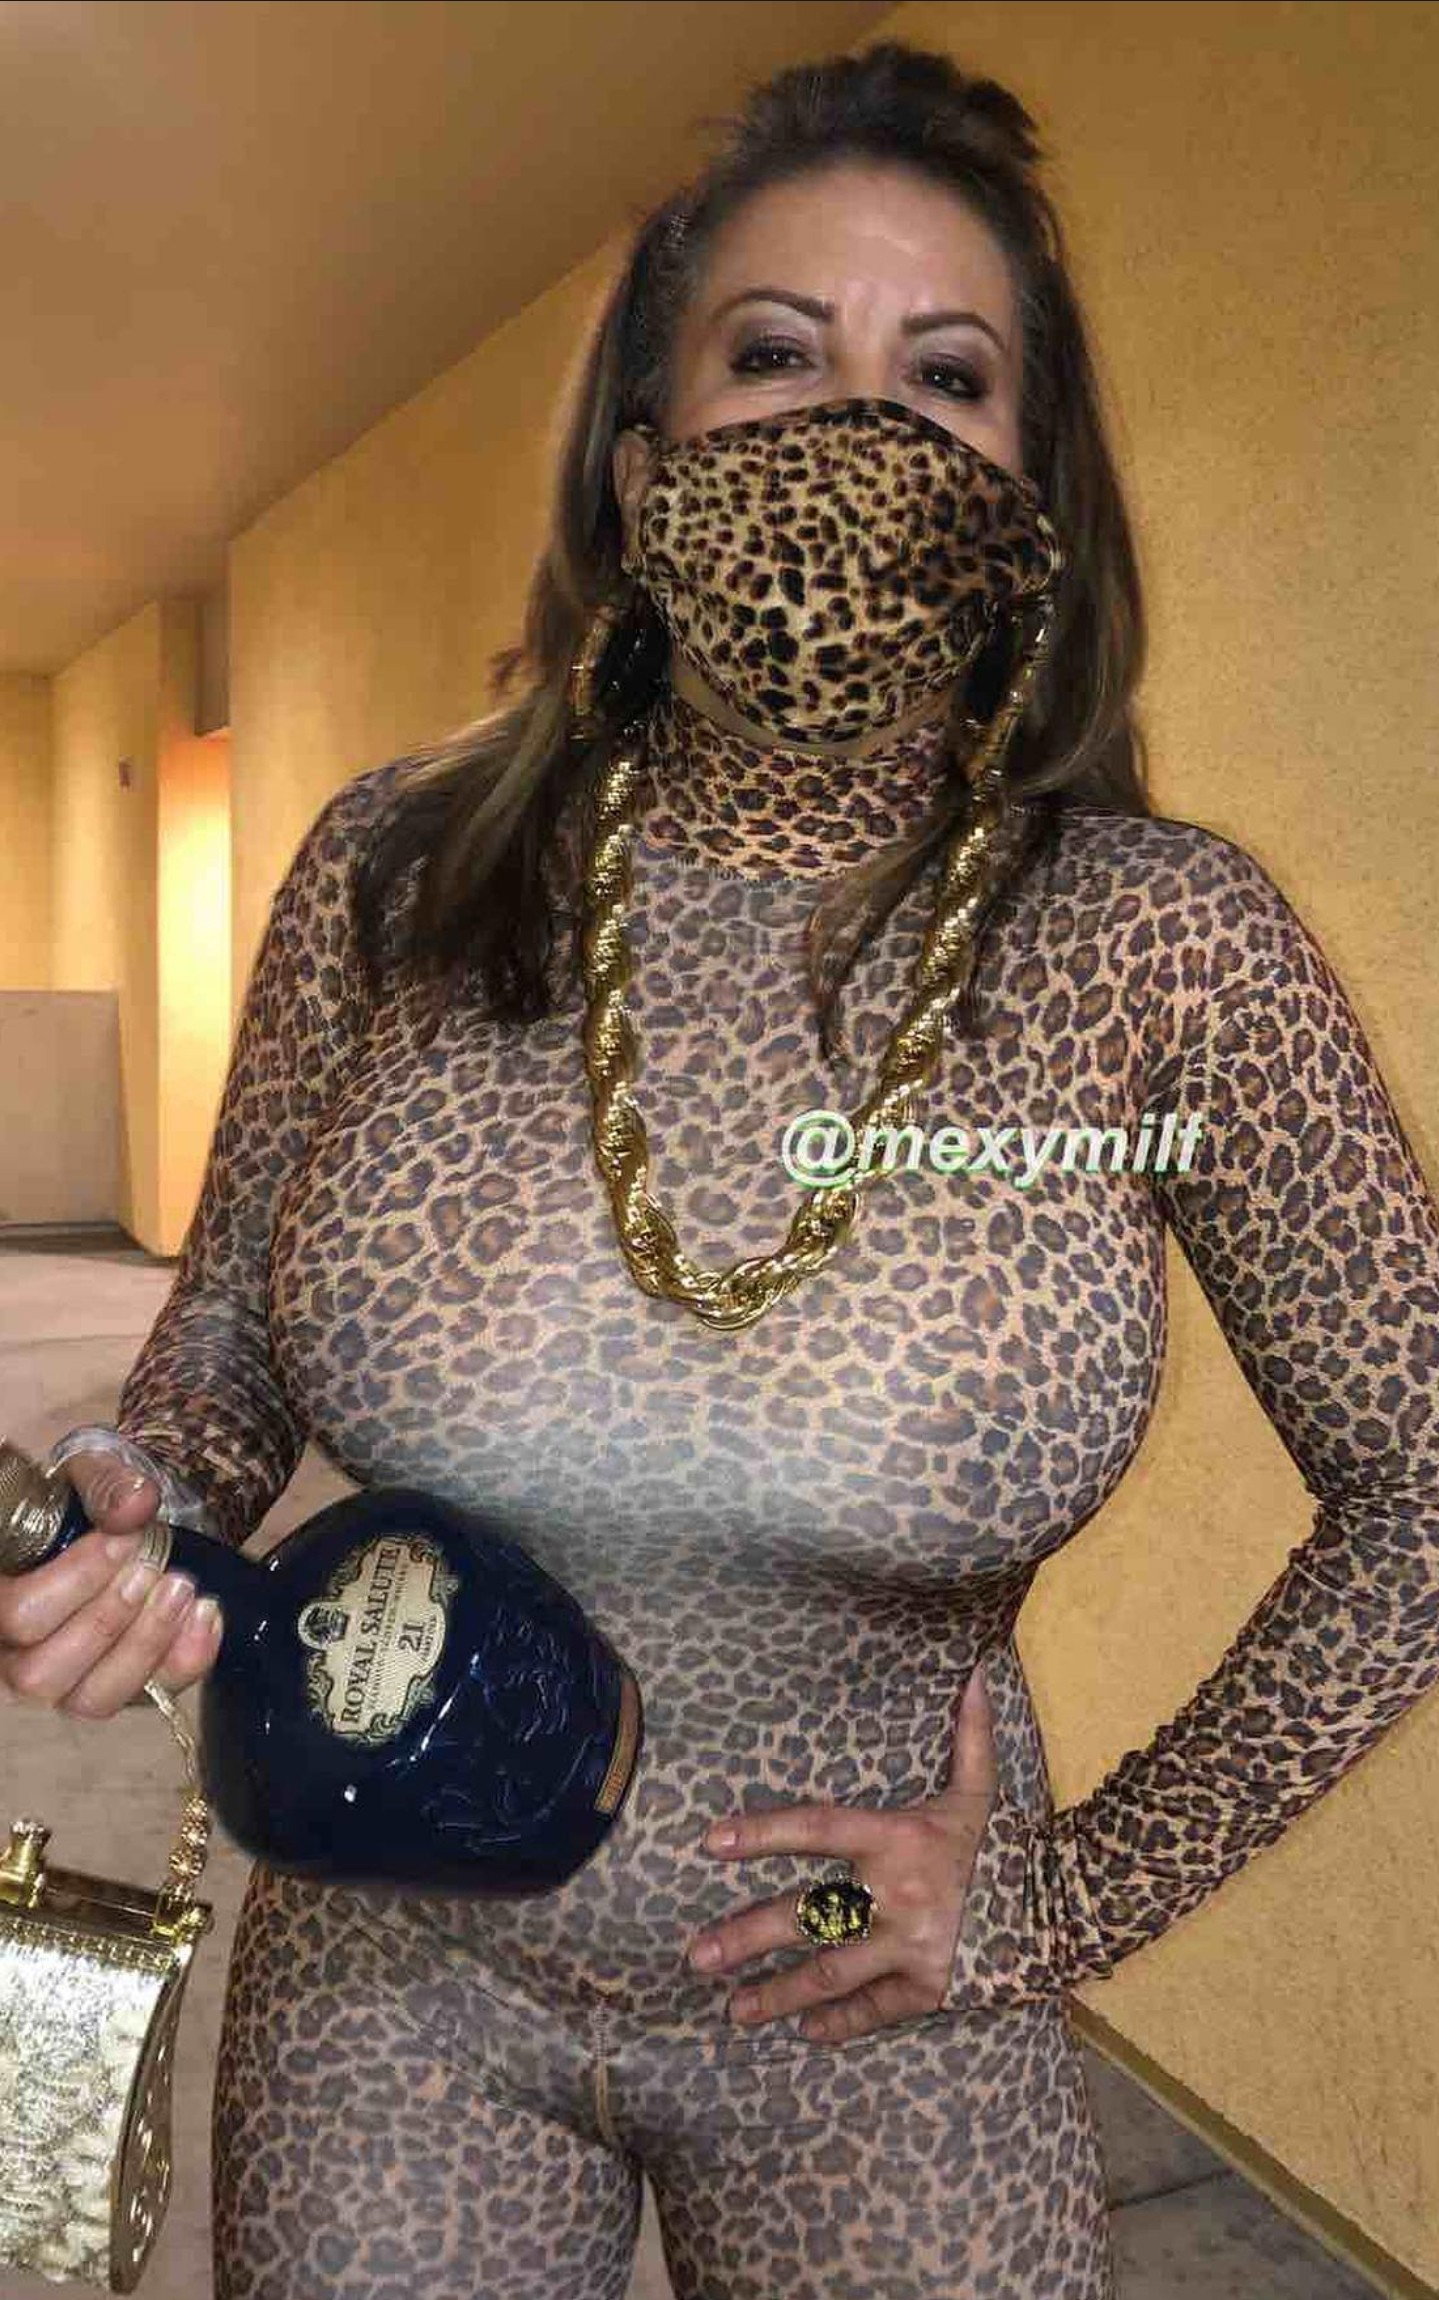 Photo by hateispride299442 with the username @hateispride299442,  November 28, 2020 at 1:20 AM. The post is about the topic Aunt/nephew and the text says 'found this gem @mexymilf no disrespect to her sensual vibes'